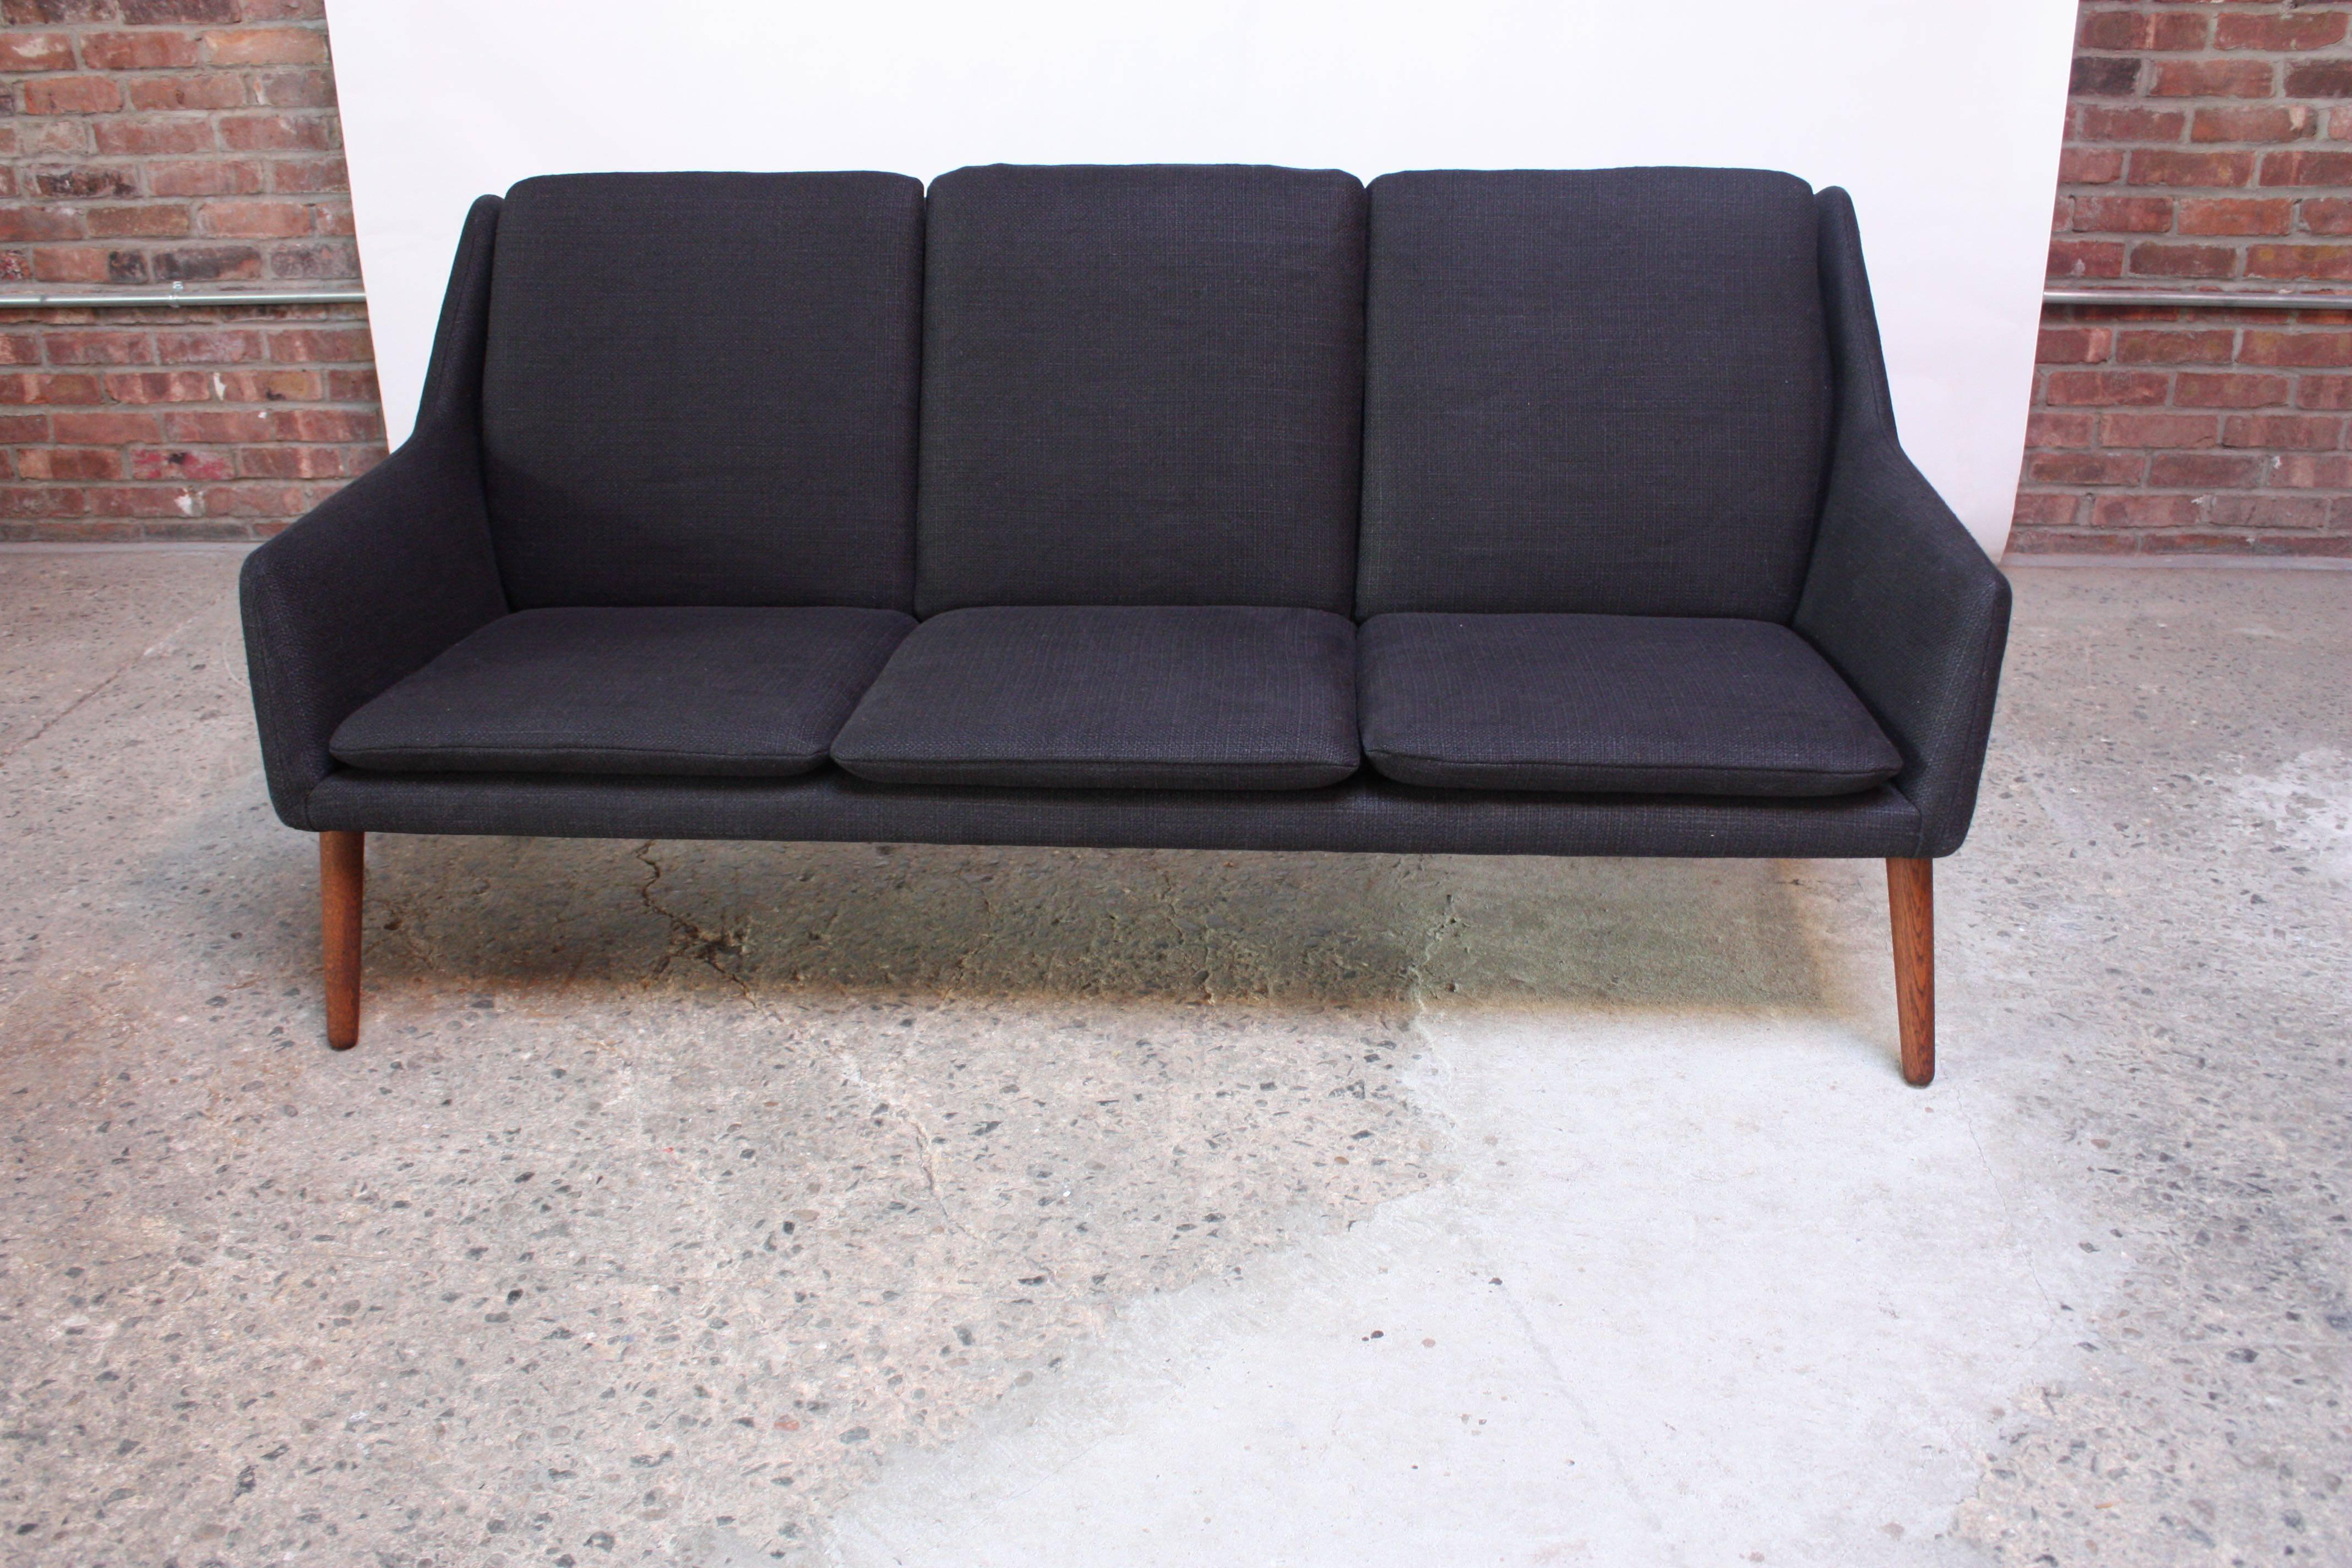 This rarely seen Danish Sofa was designed by Erik Osterman and H. Høpner Petersen for Godtfred Petersen in the late 1950s. It boasts clean lines, accentuated by thin, stained-oak splayed legs. The solid black tweed upholstery is new and the foam has